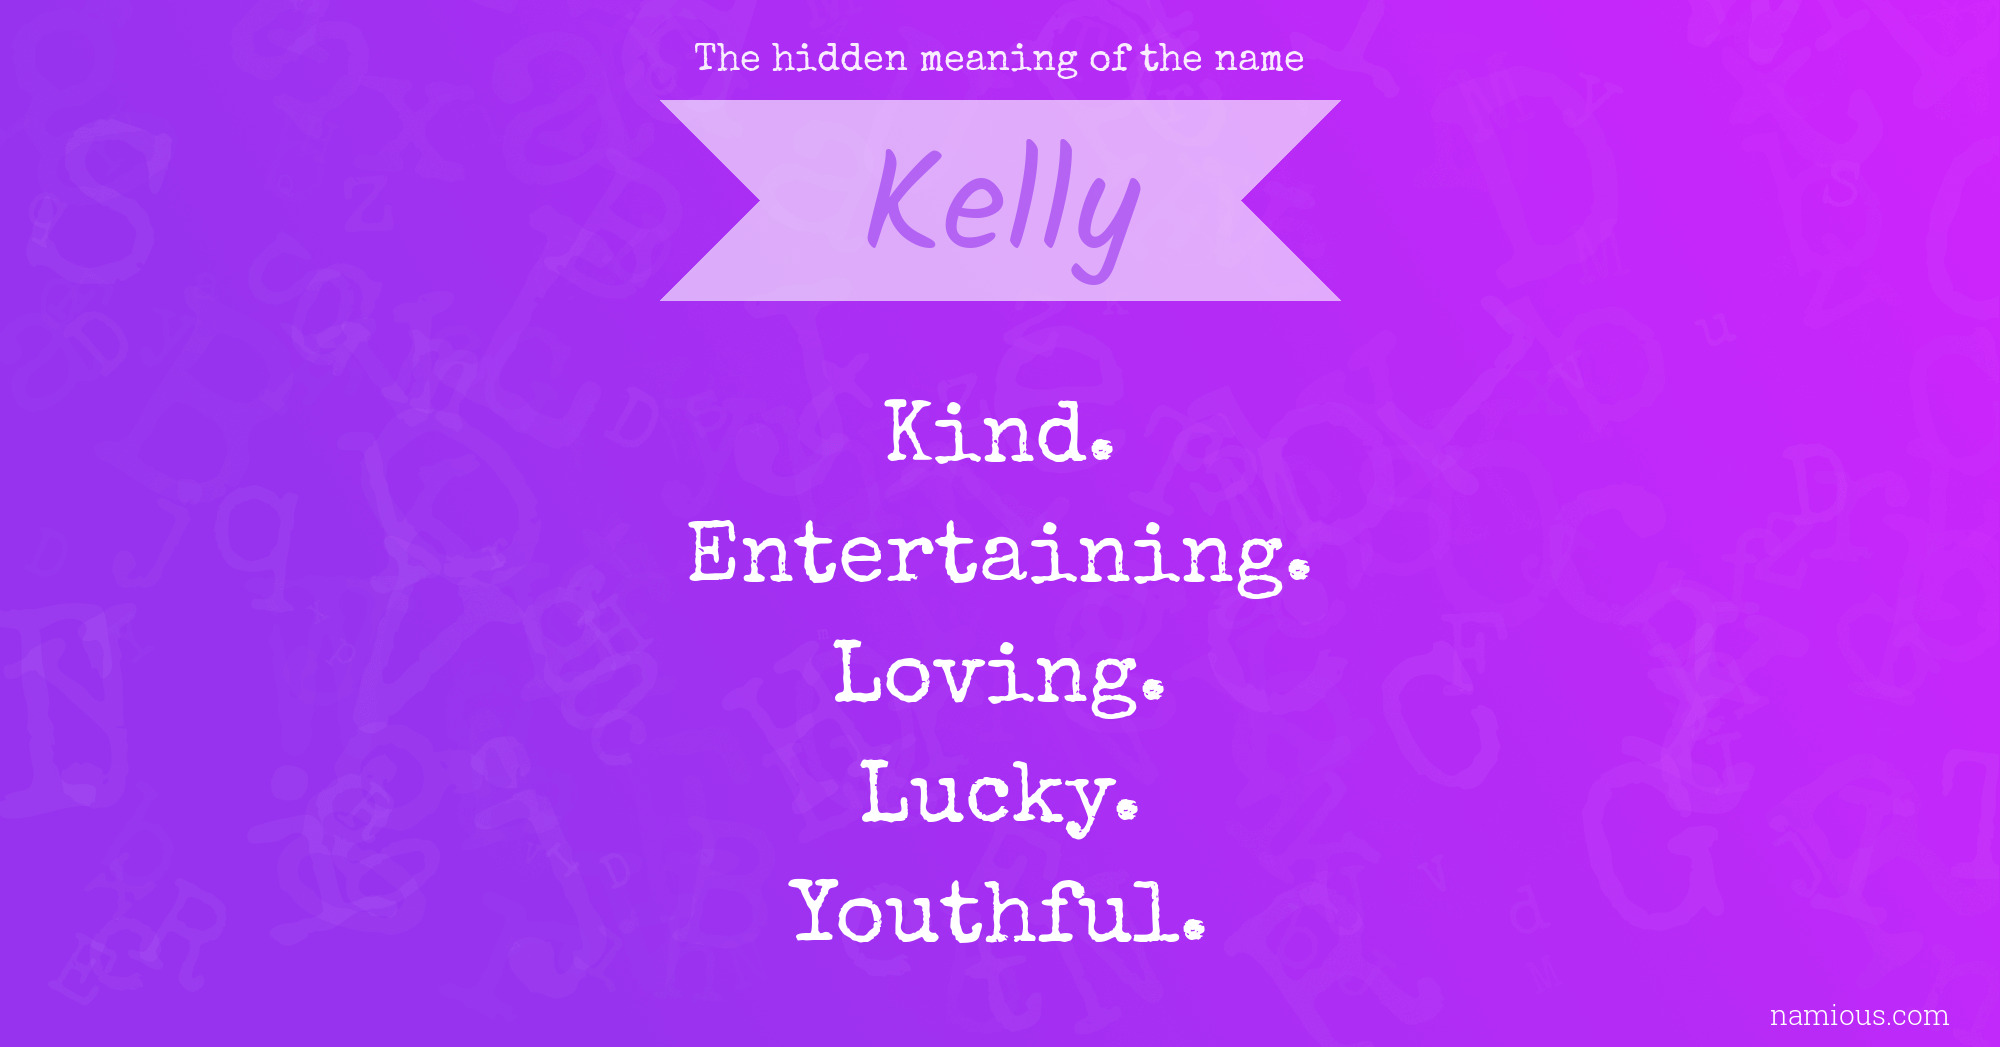 The hidden meaning of the name Kelly